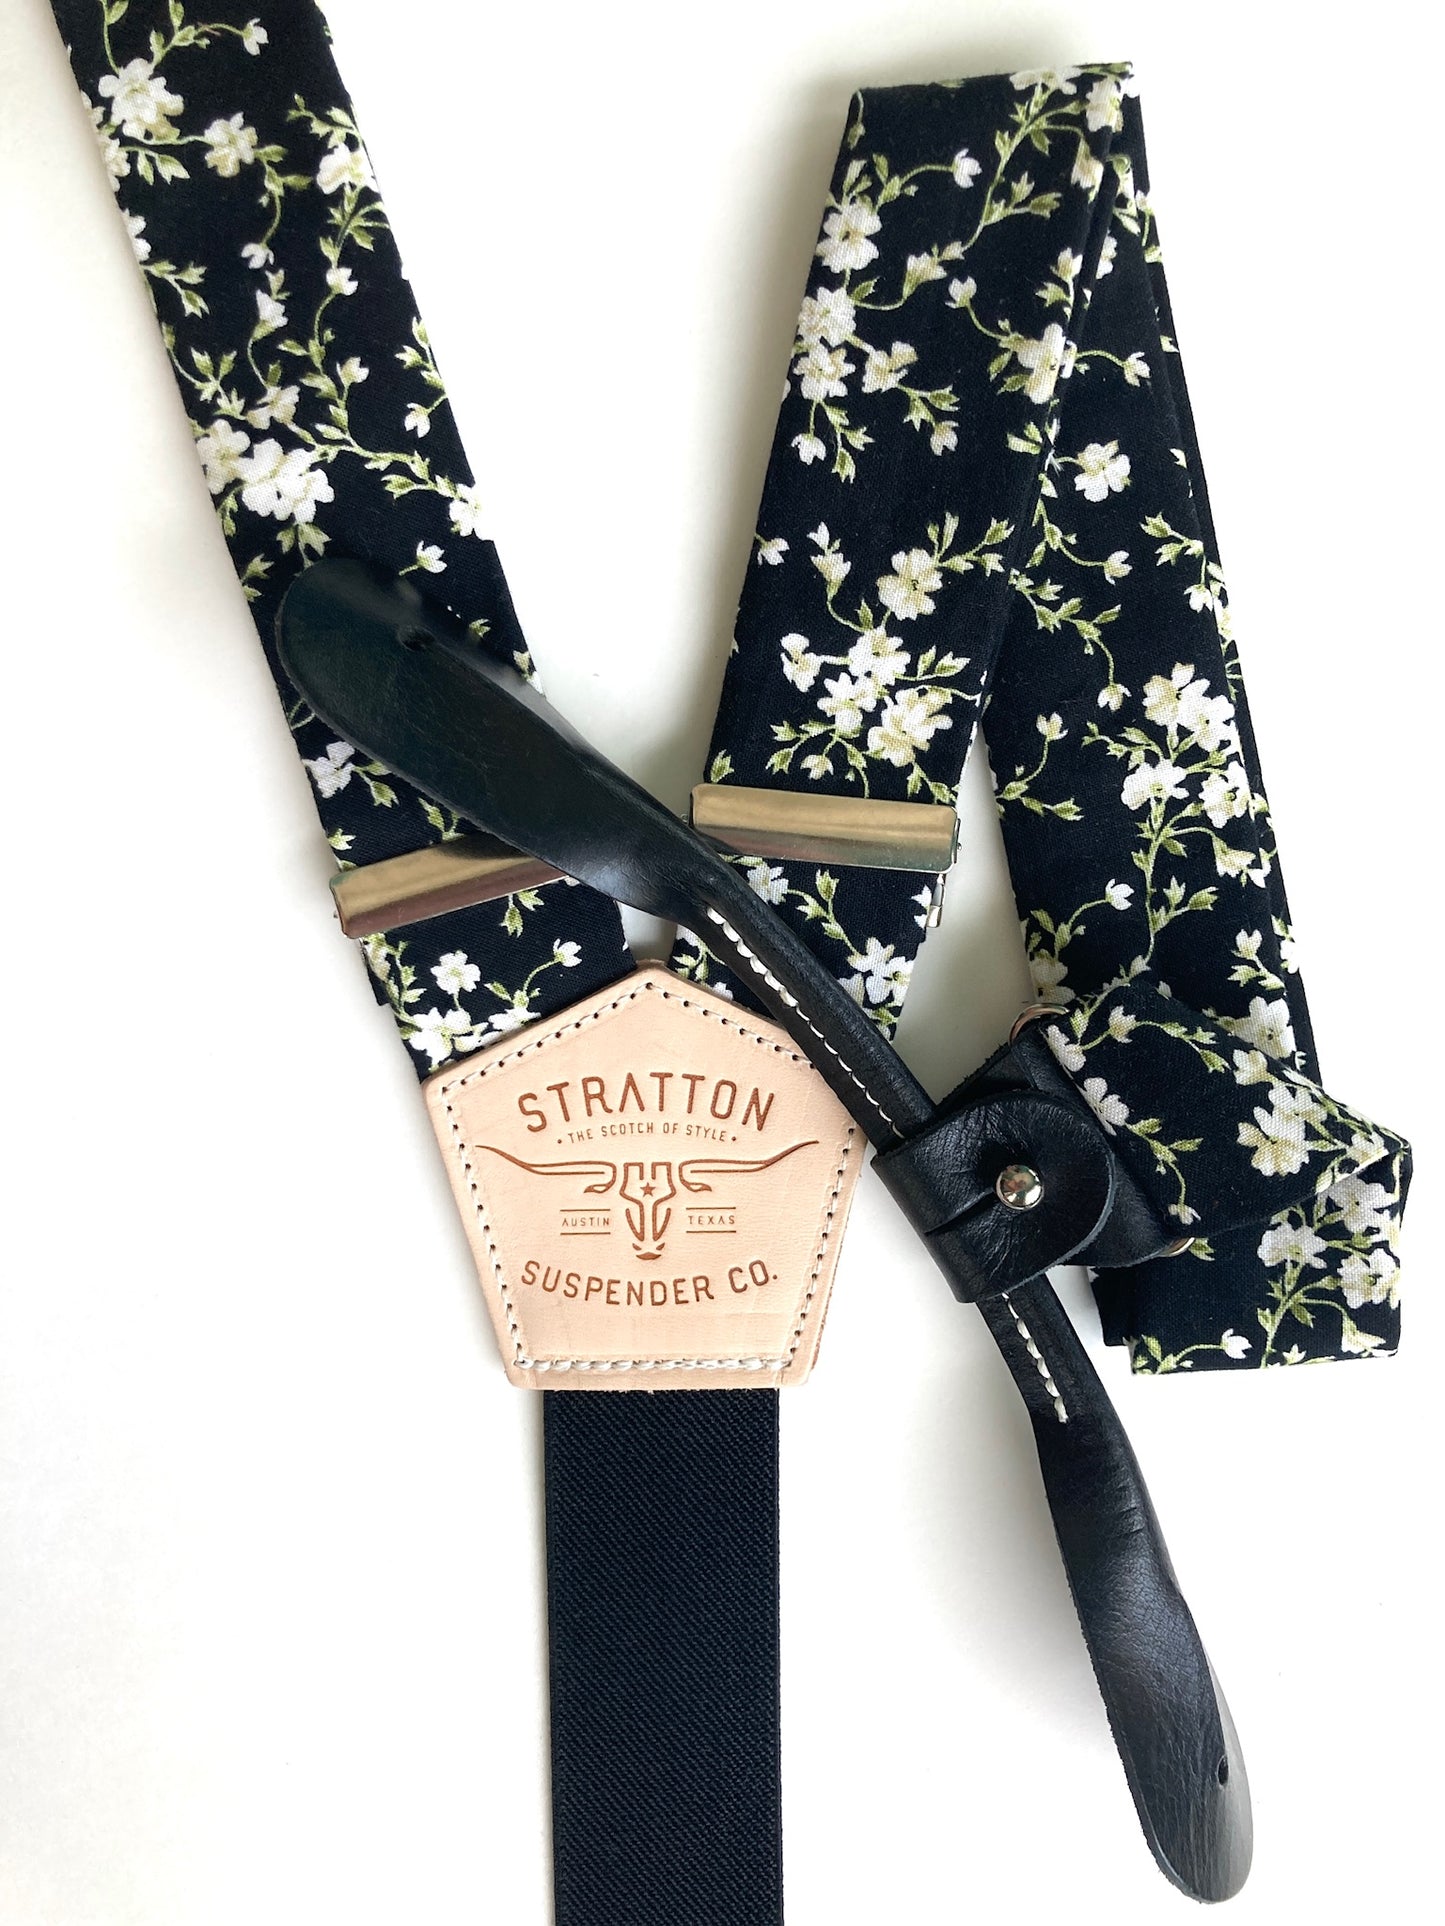 Black and White with Green Stem Floral Suspenders Paired with Black Leather Button-On Attachments